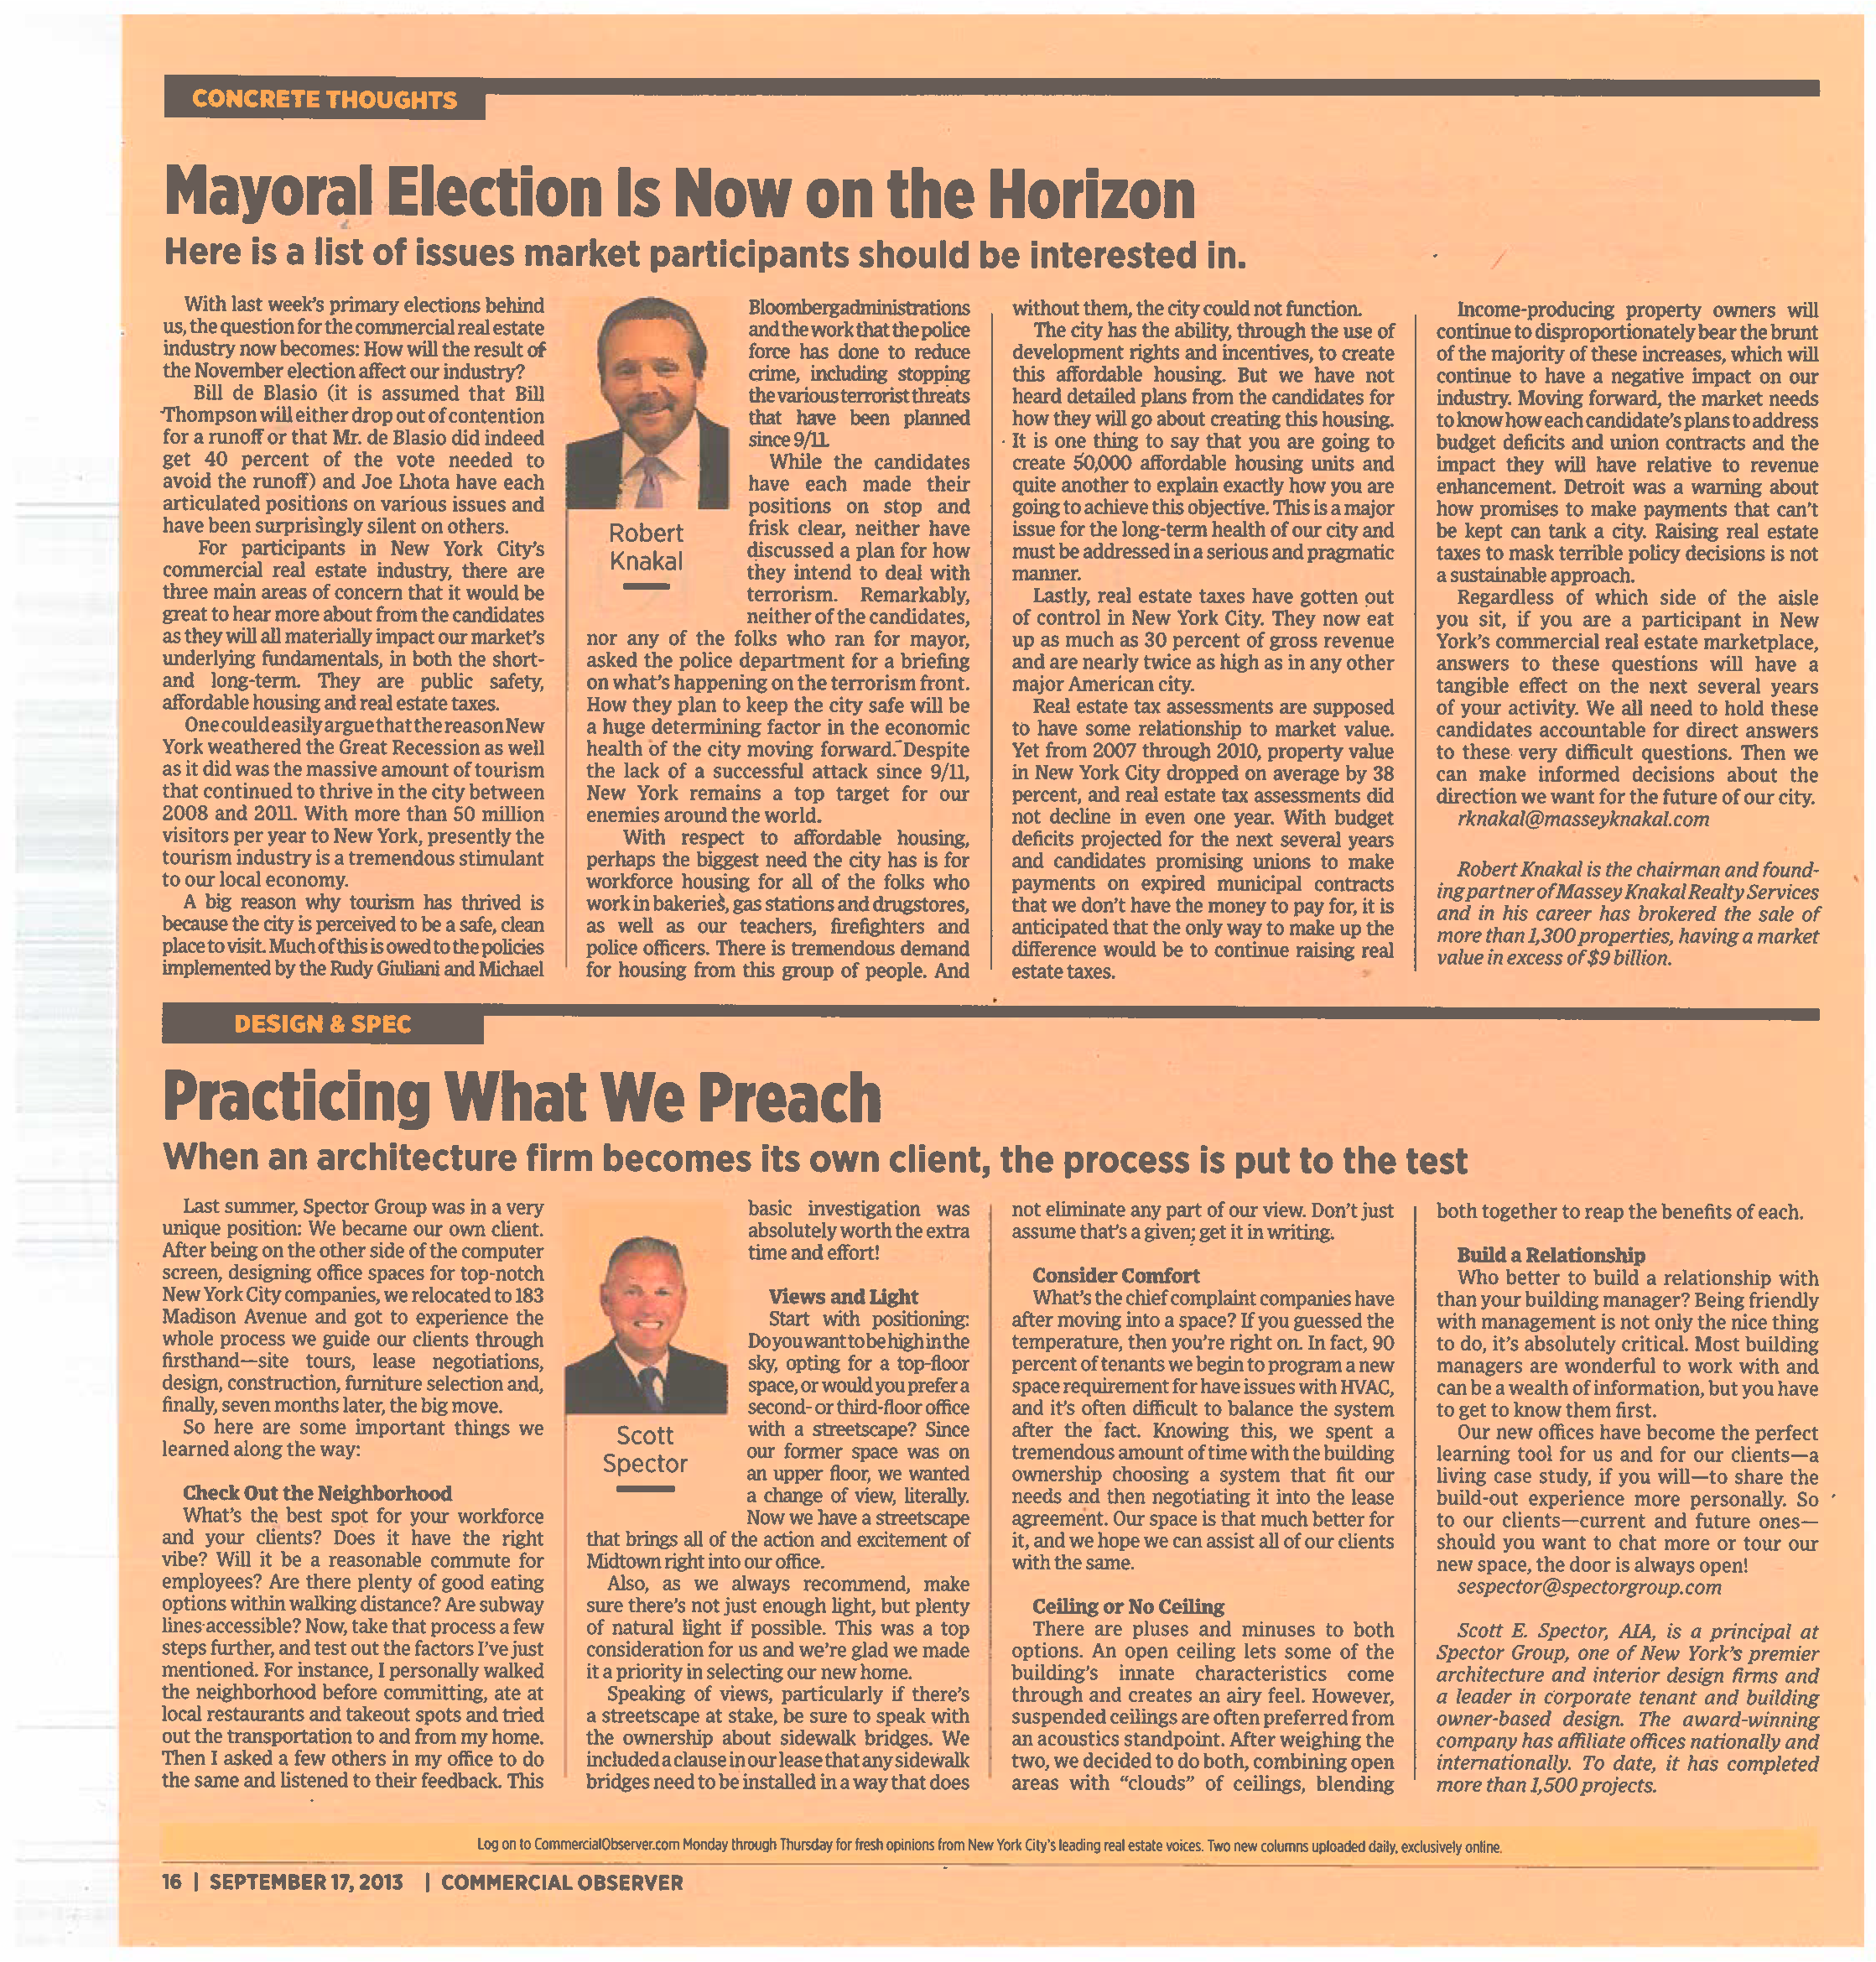 Concrete Thoughts - Mayoral Election Is Now on the Horizon - Sep 17 2013